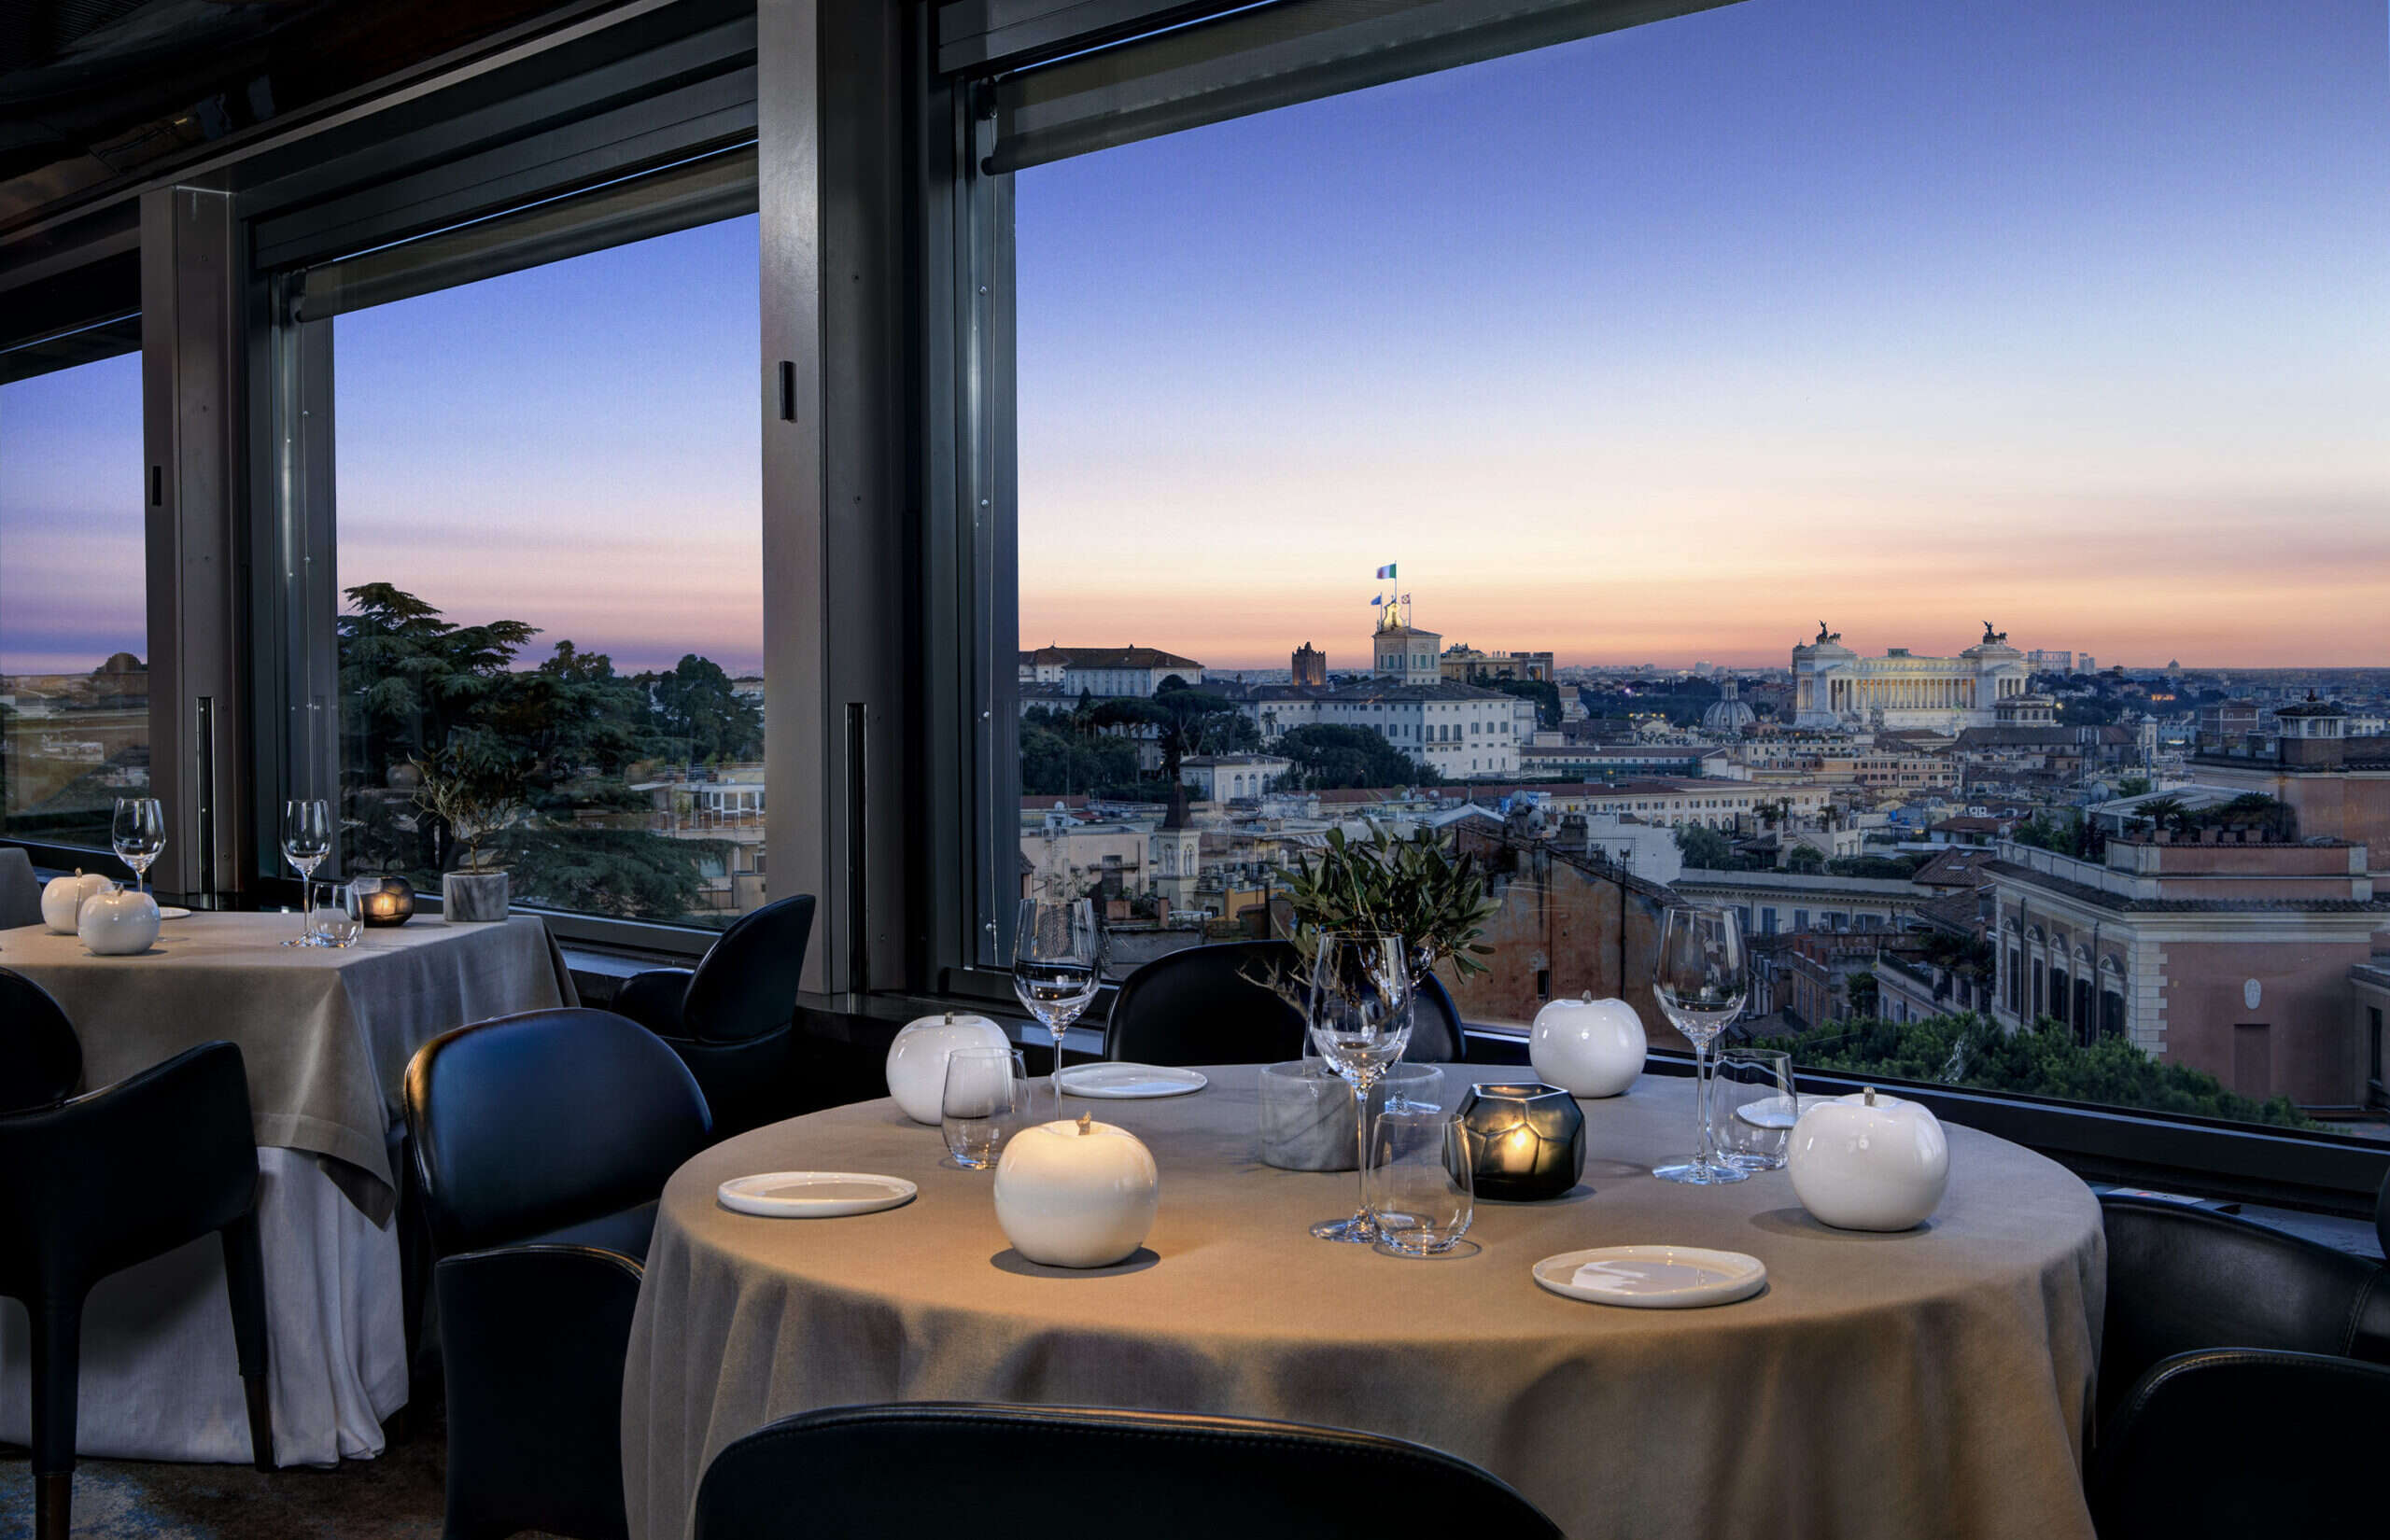 The Best Fine Dining Restaurants in Rome